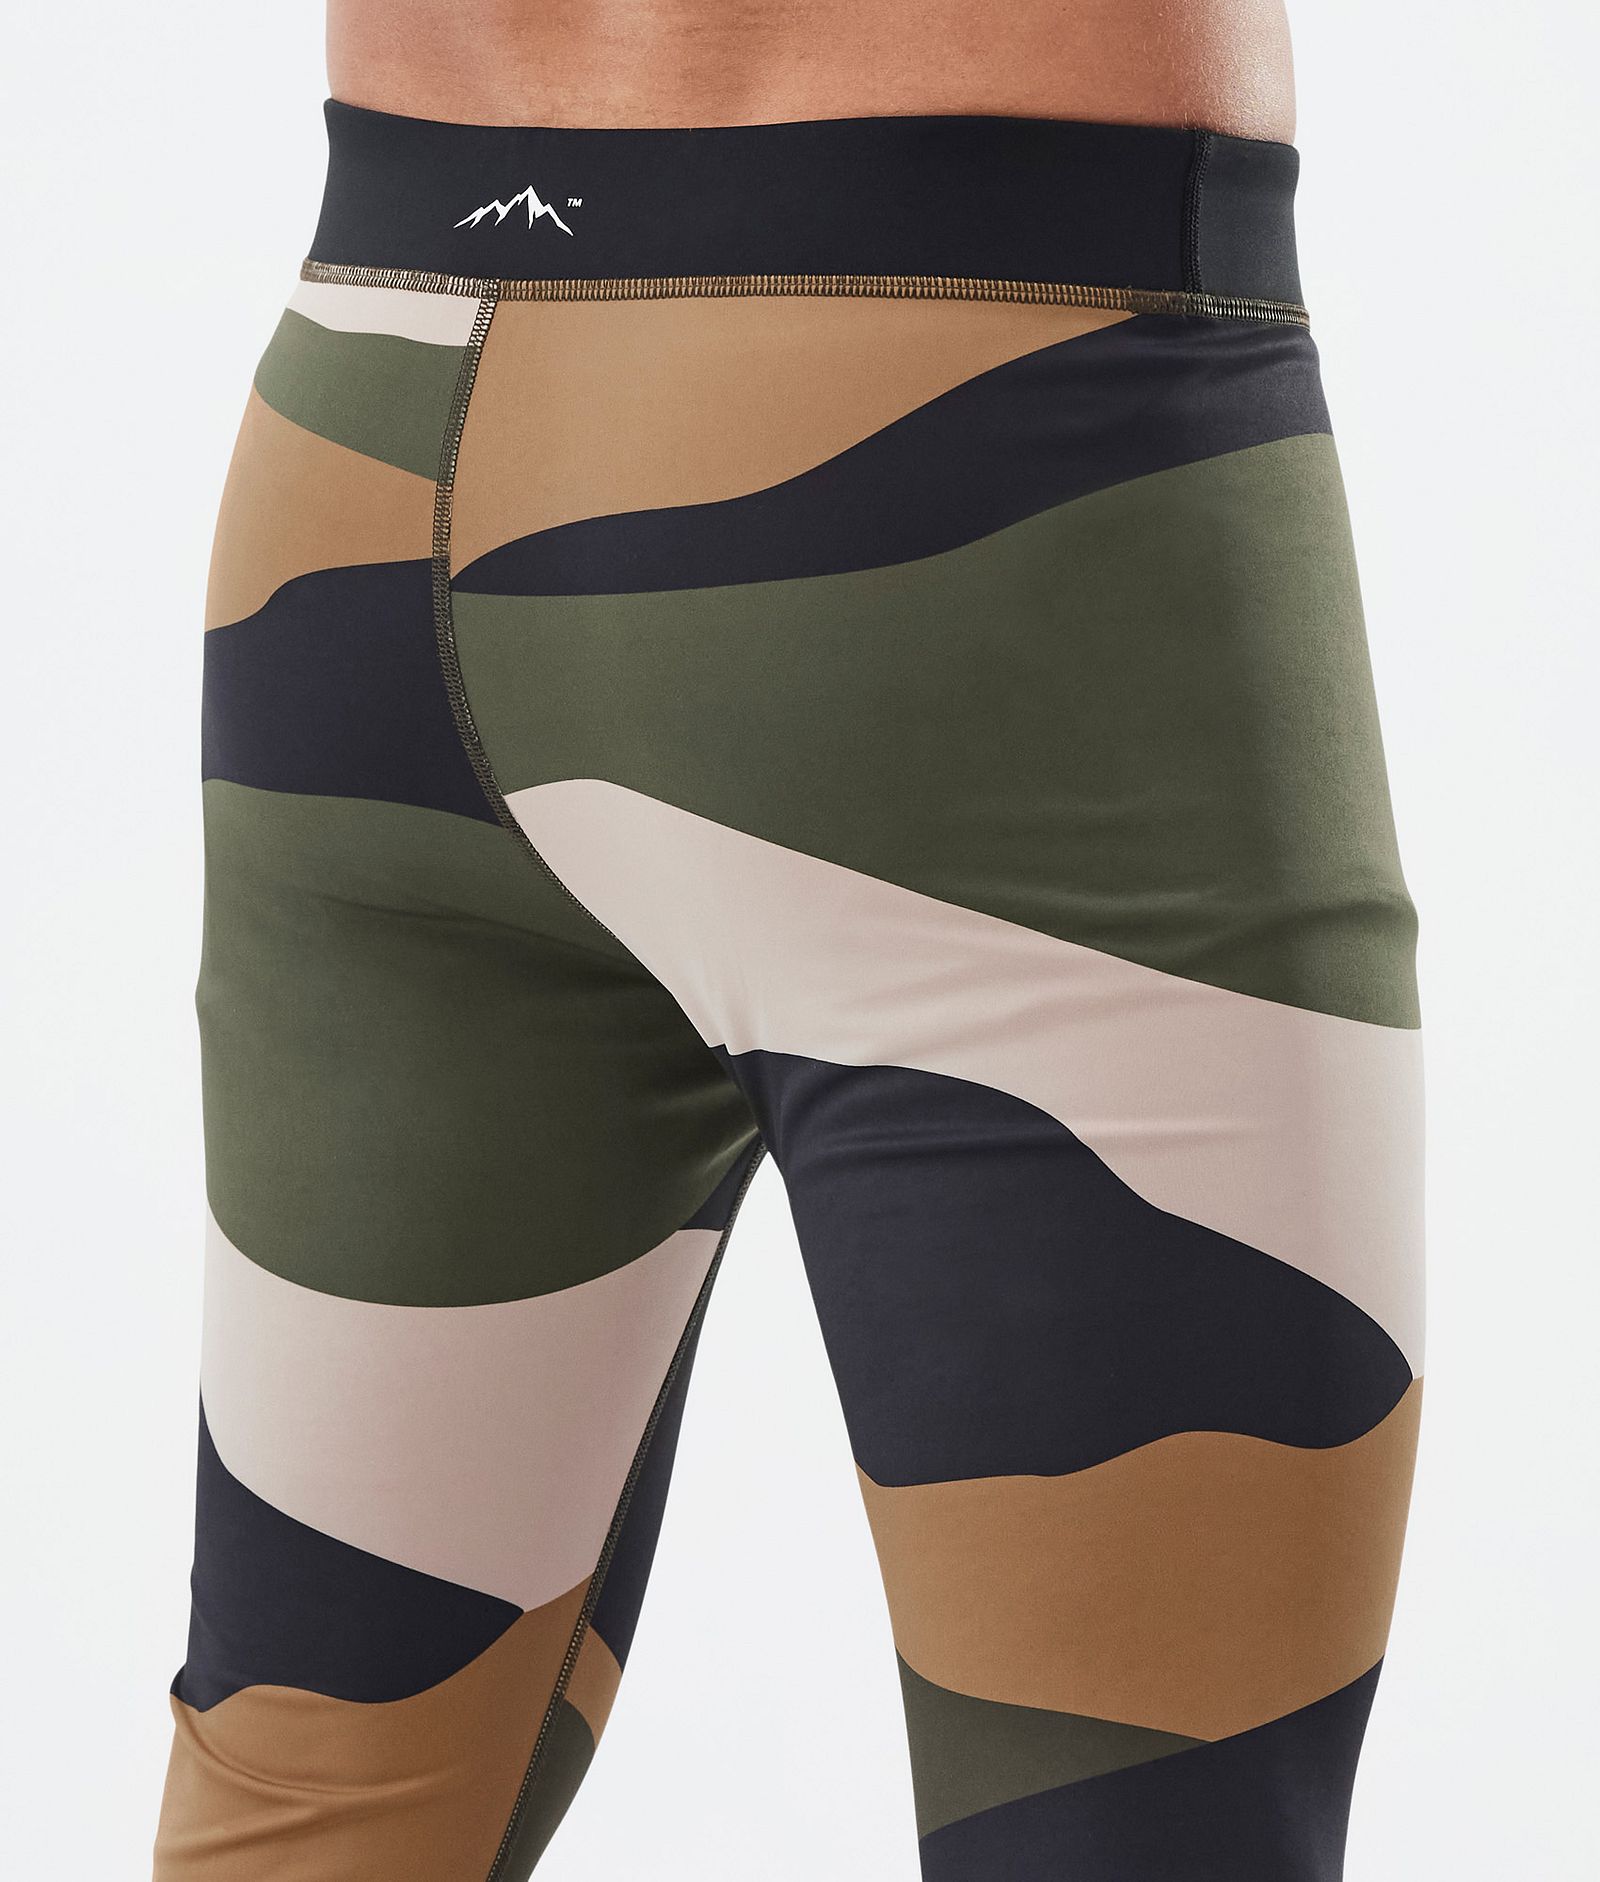 Dope Snuggle Baselayer tights Herre 2X-Up Shards Gold Green